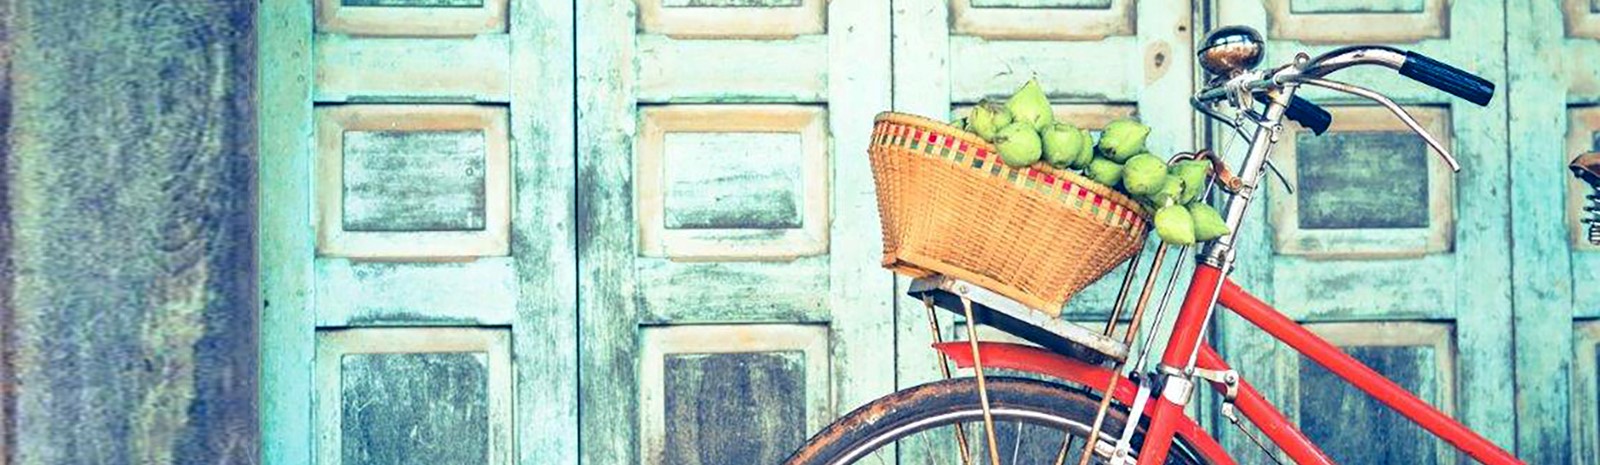 Red bicycle with fruit in basket